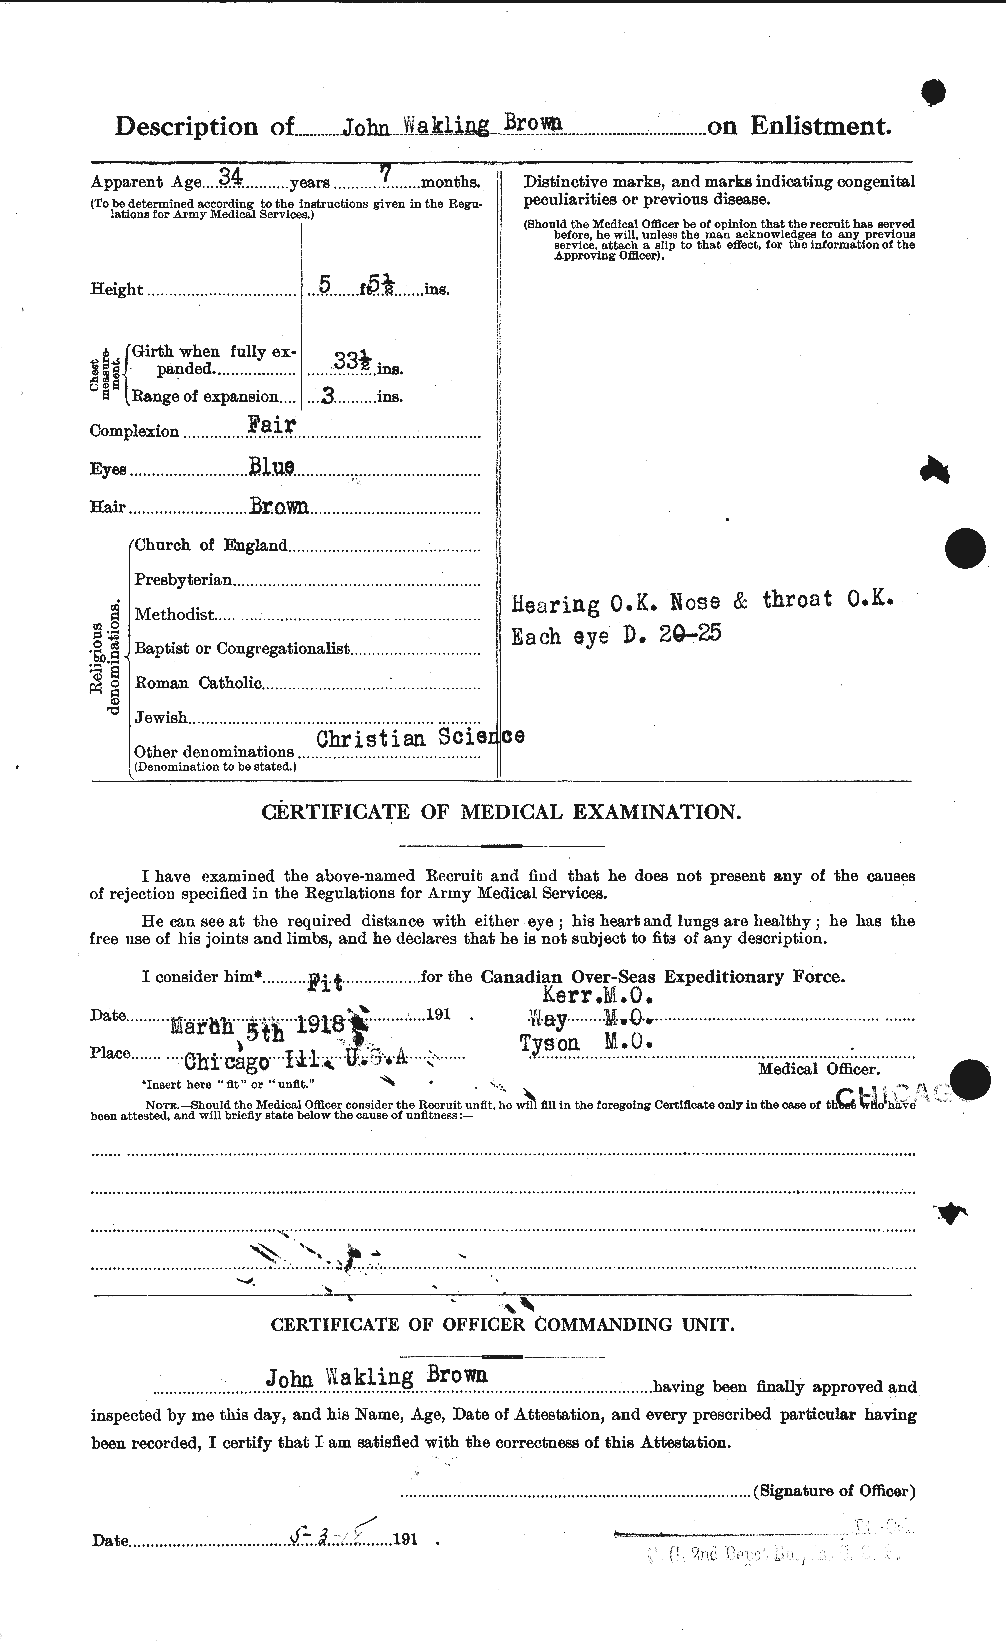 Personnel Records of the First World War - CEF 265893b